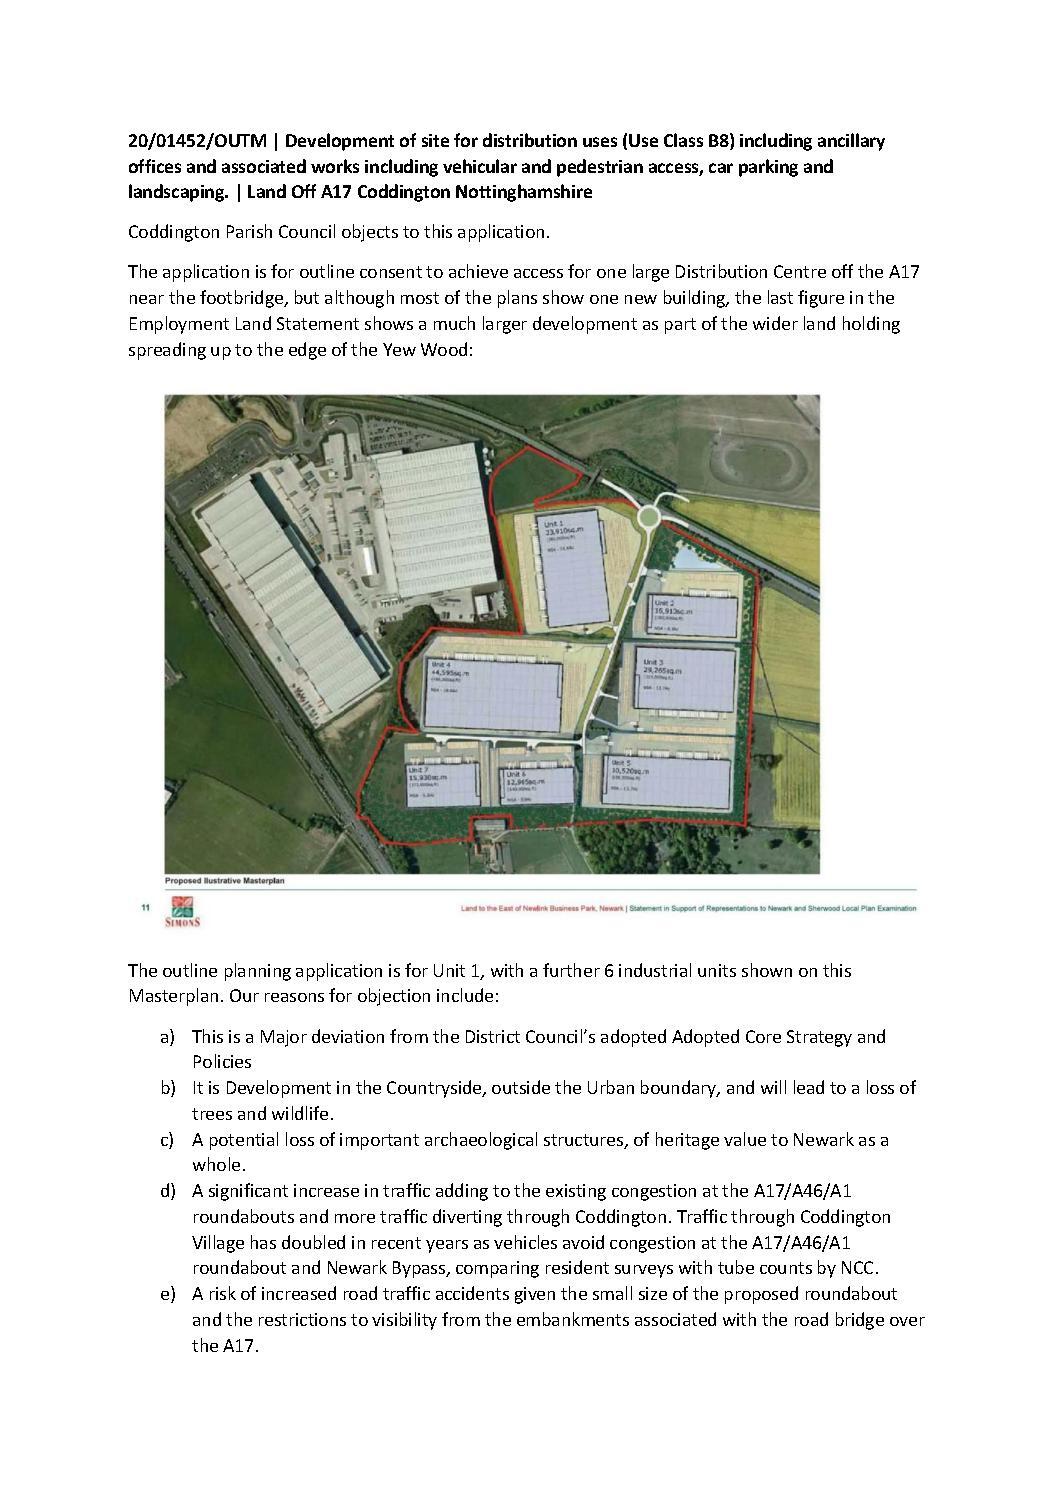 Parish Council's objections to the A17 distribution centre.